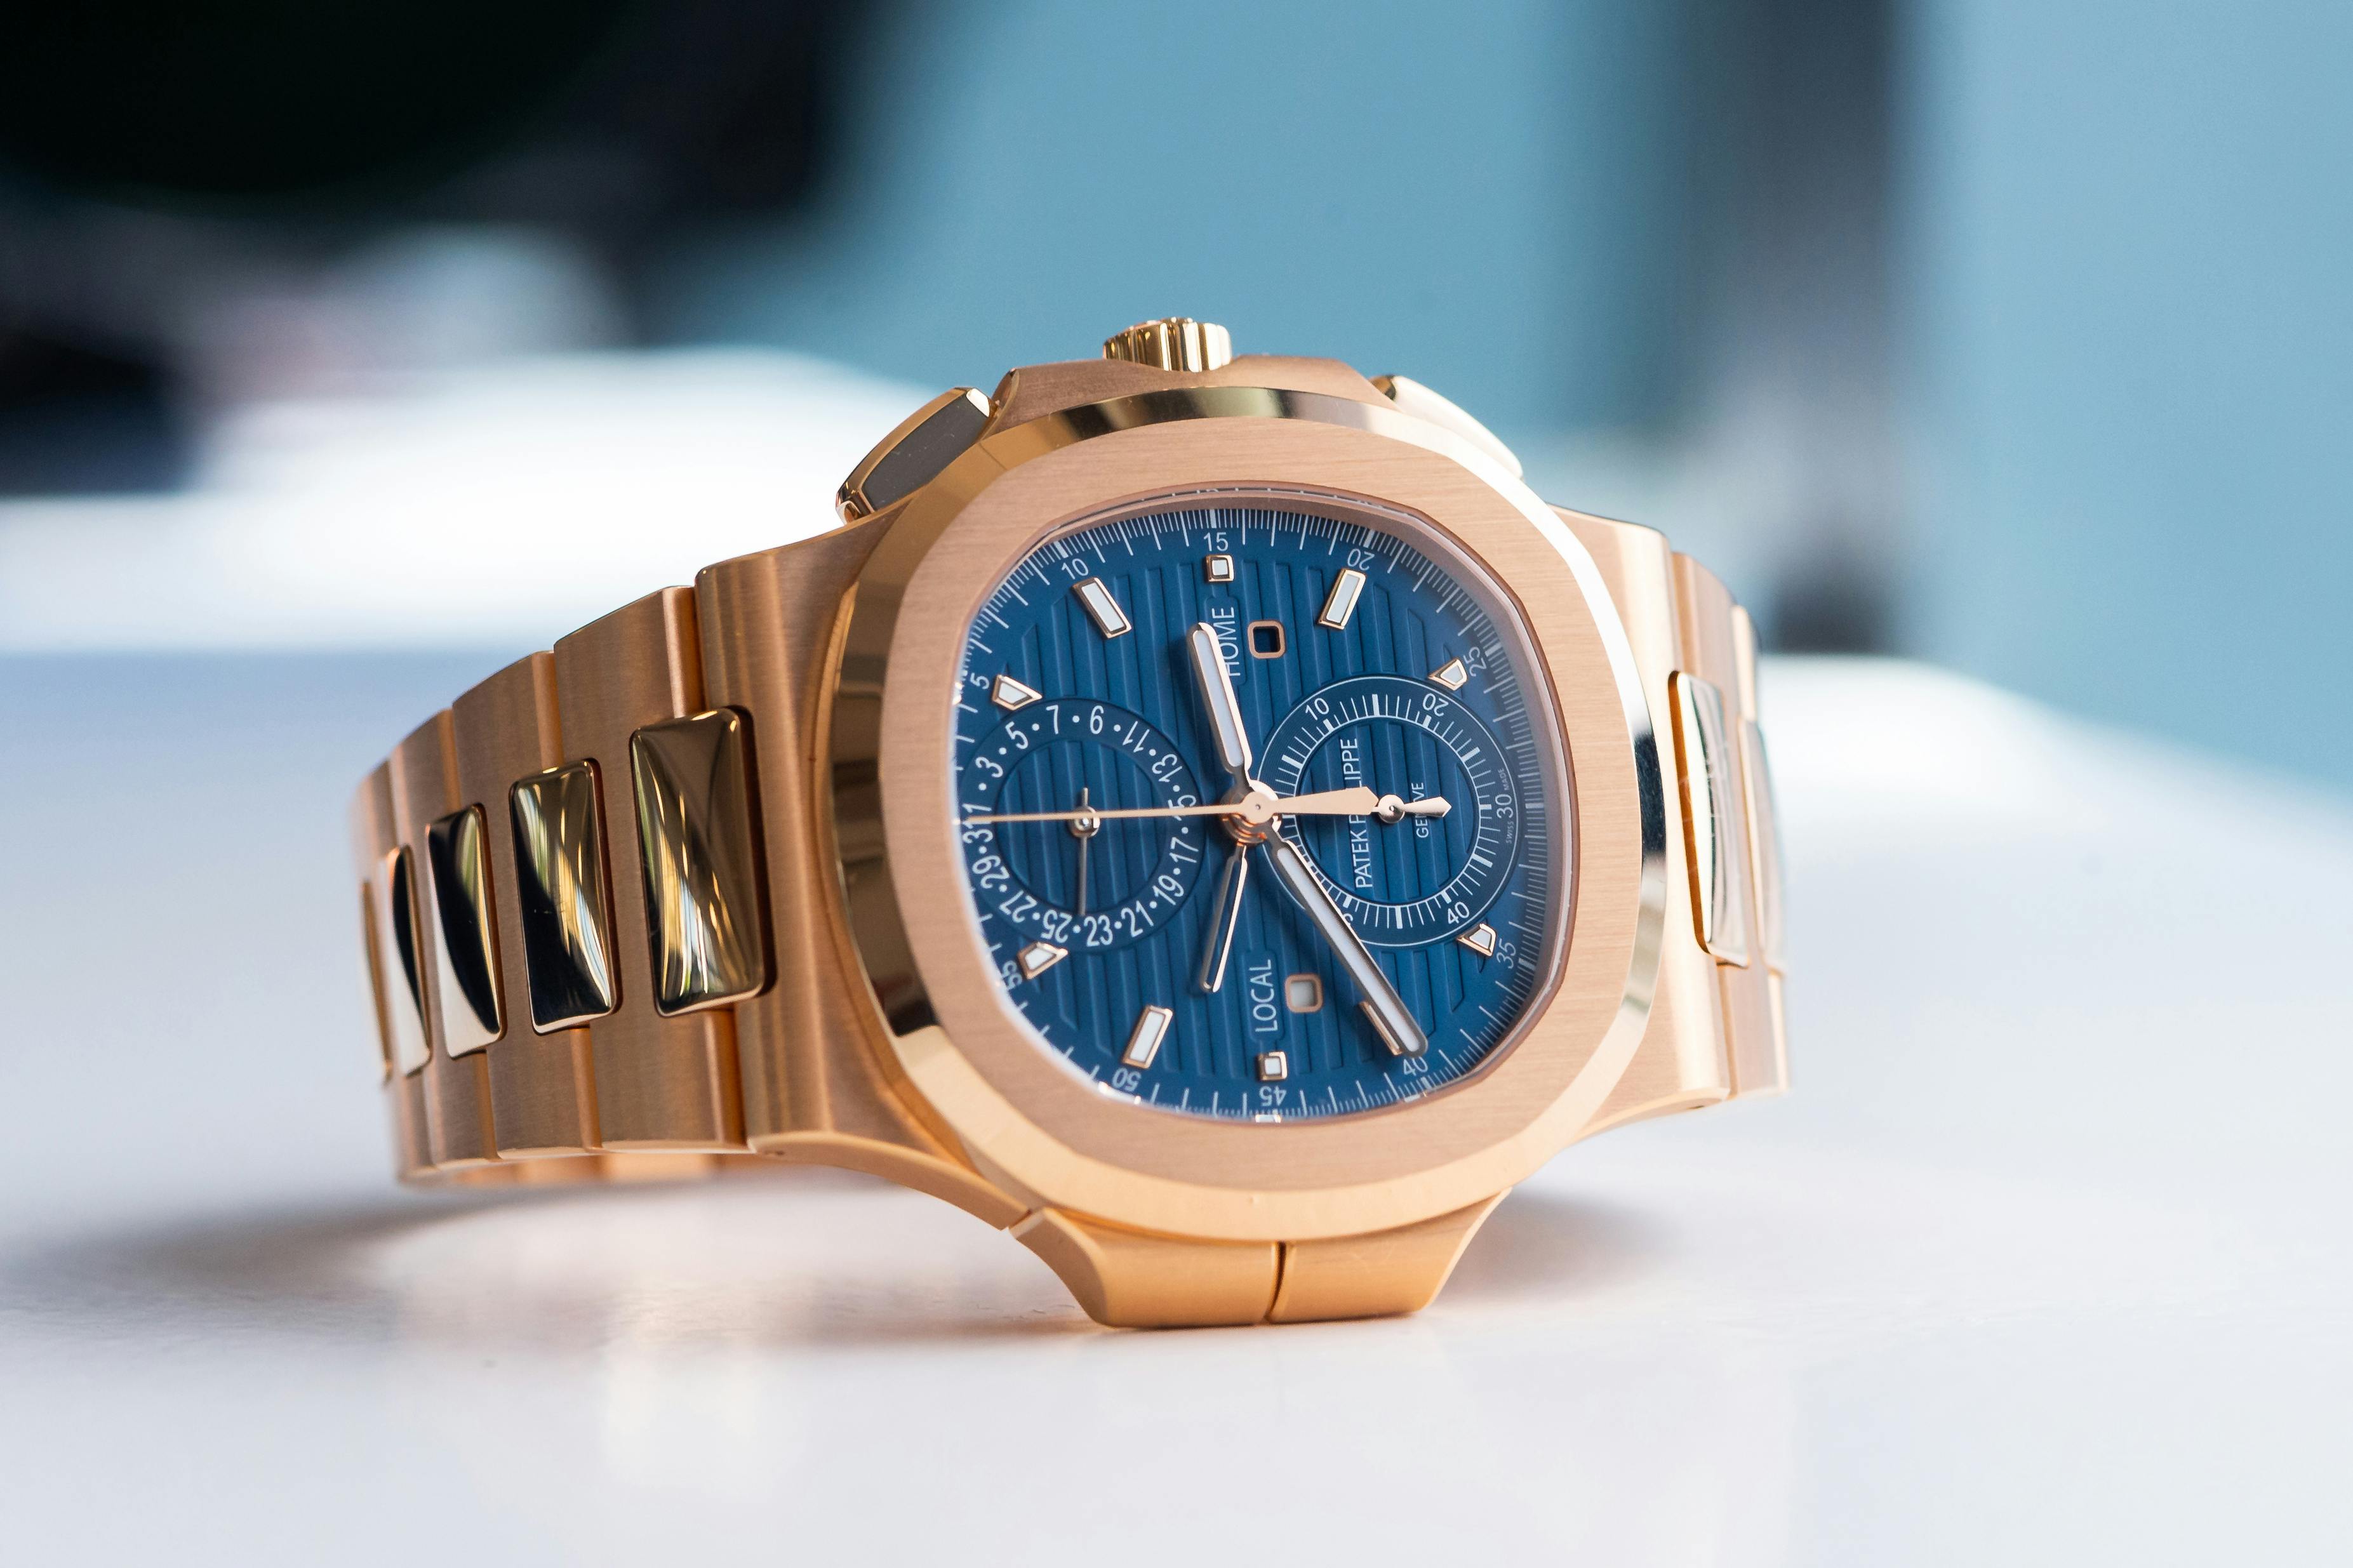 2022 PATEK PHILIPPE NAUTILUS PERPETUAL CALENDAR for sale by auction in  London, United Kingdom